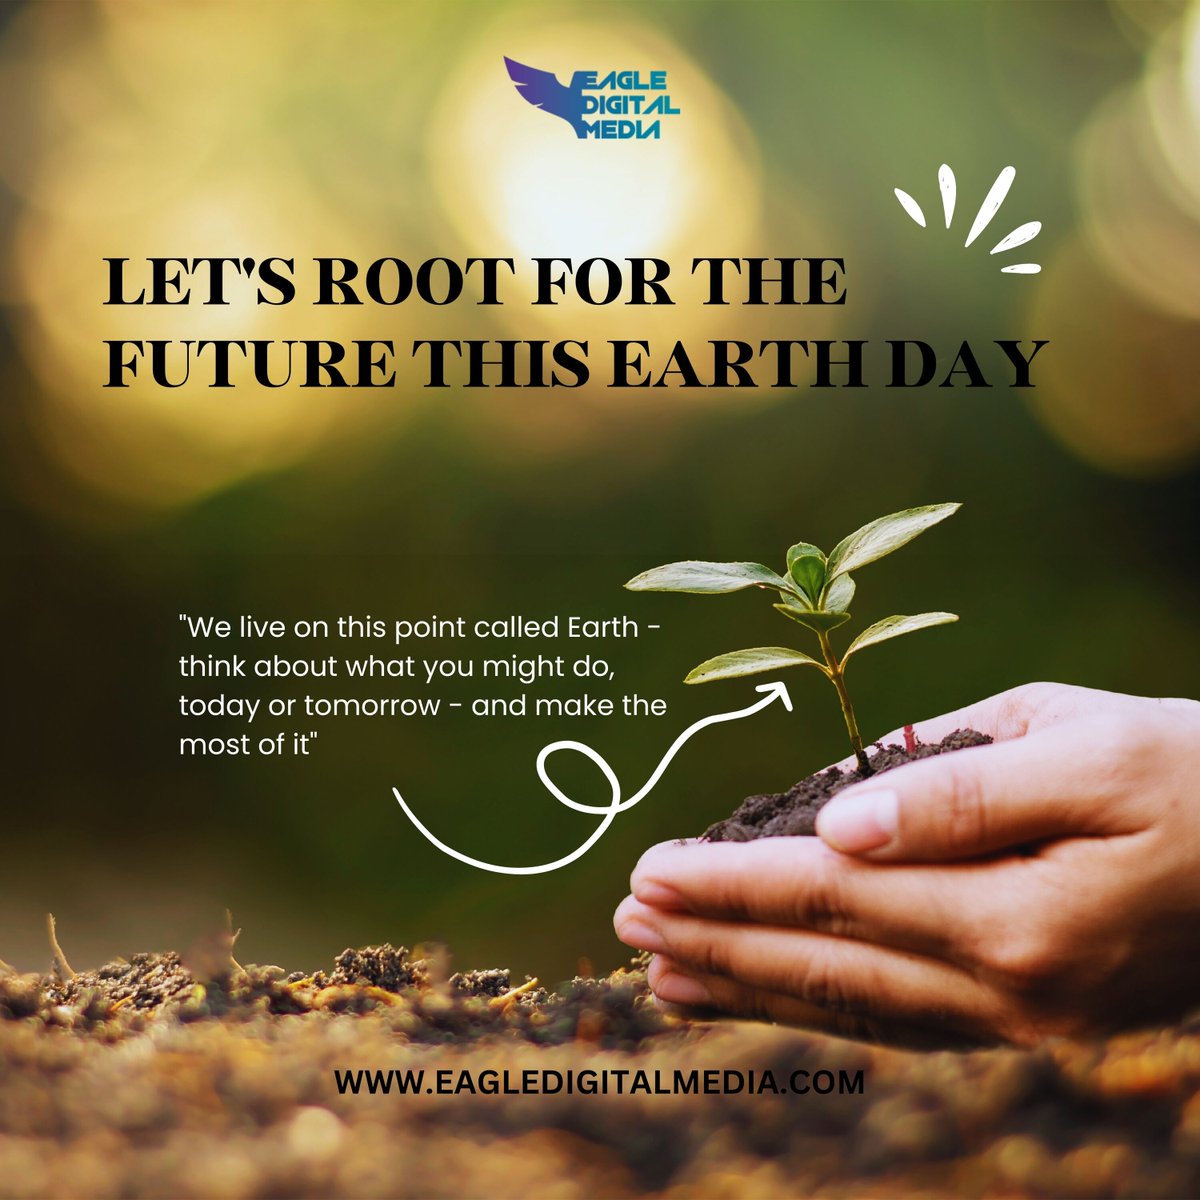 This Earth Day, Eagle Digital Media joins voices around the world in a call to protect and cherish our planet 🌍🌱
#EarthDay #ActForEarth #EagleDigitalMedia